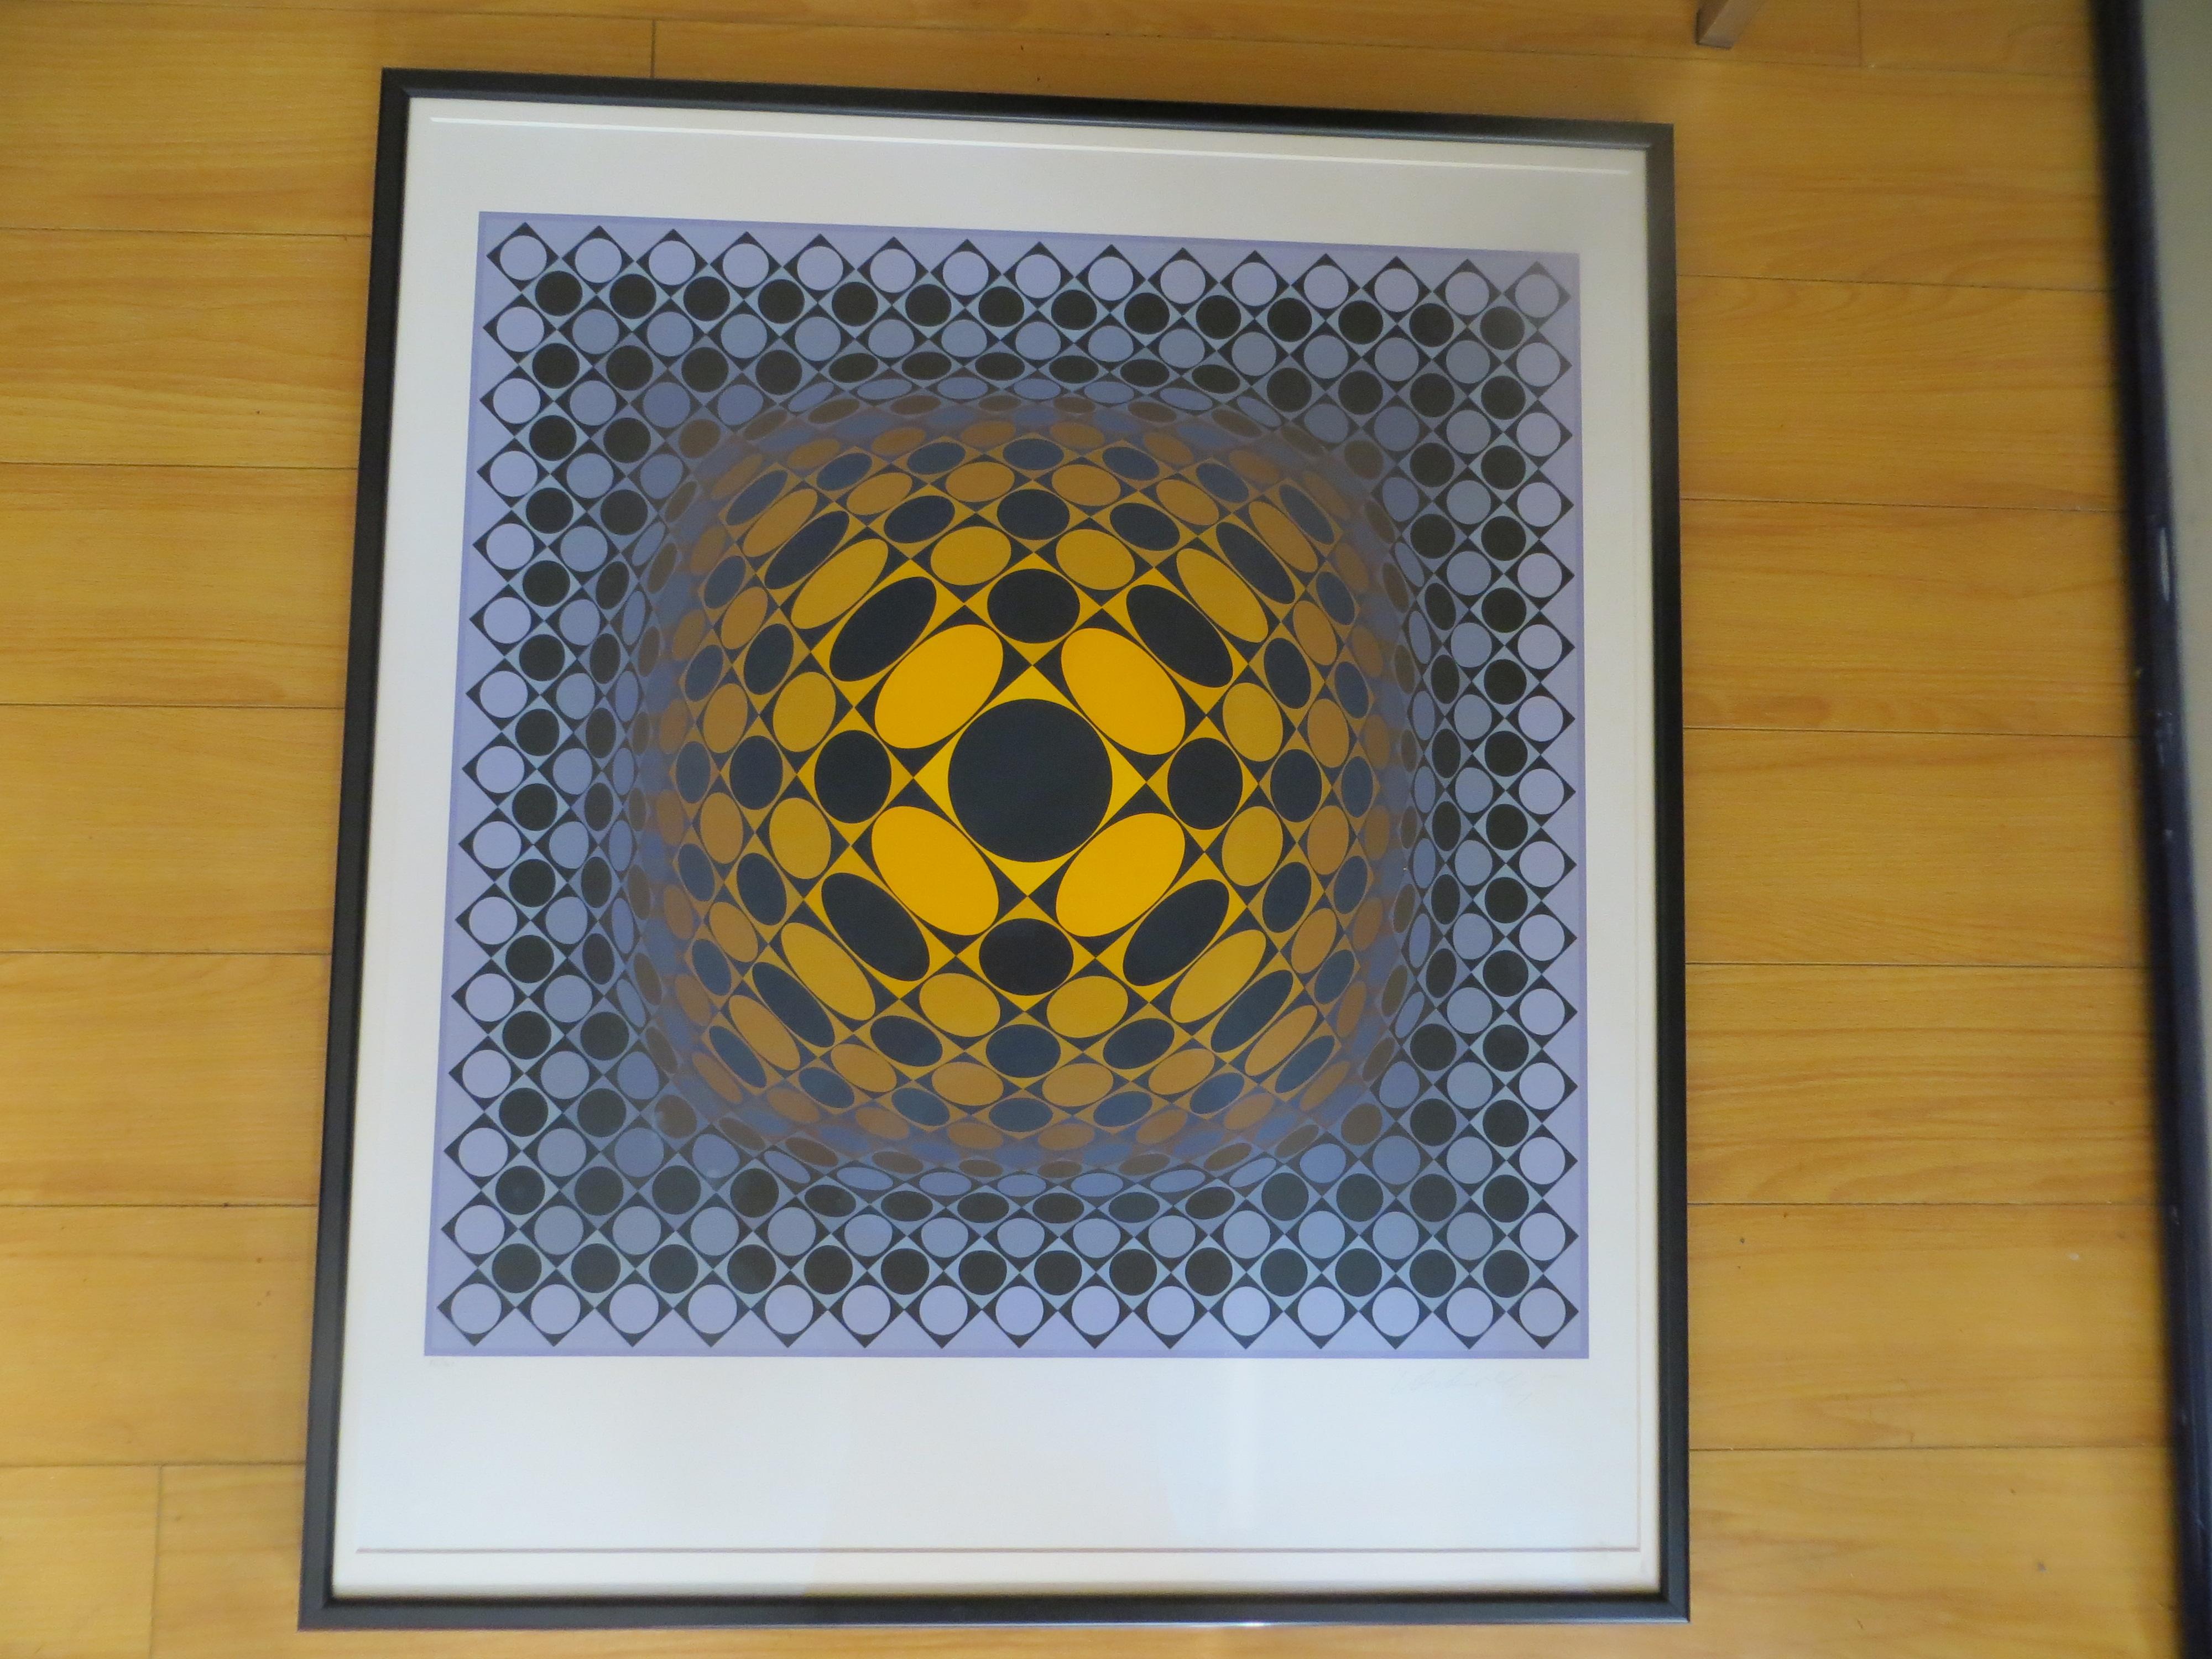 Composition Ionau, Op Art print by Victor Vasarely 1987 For Sale 4